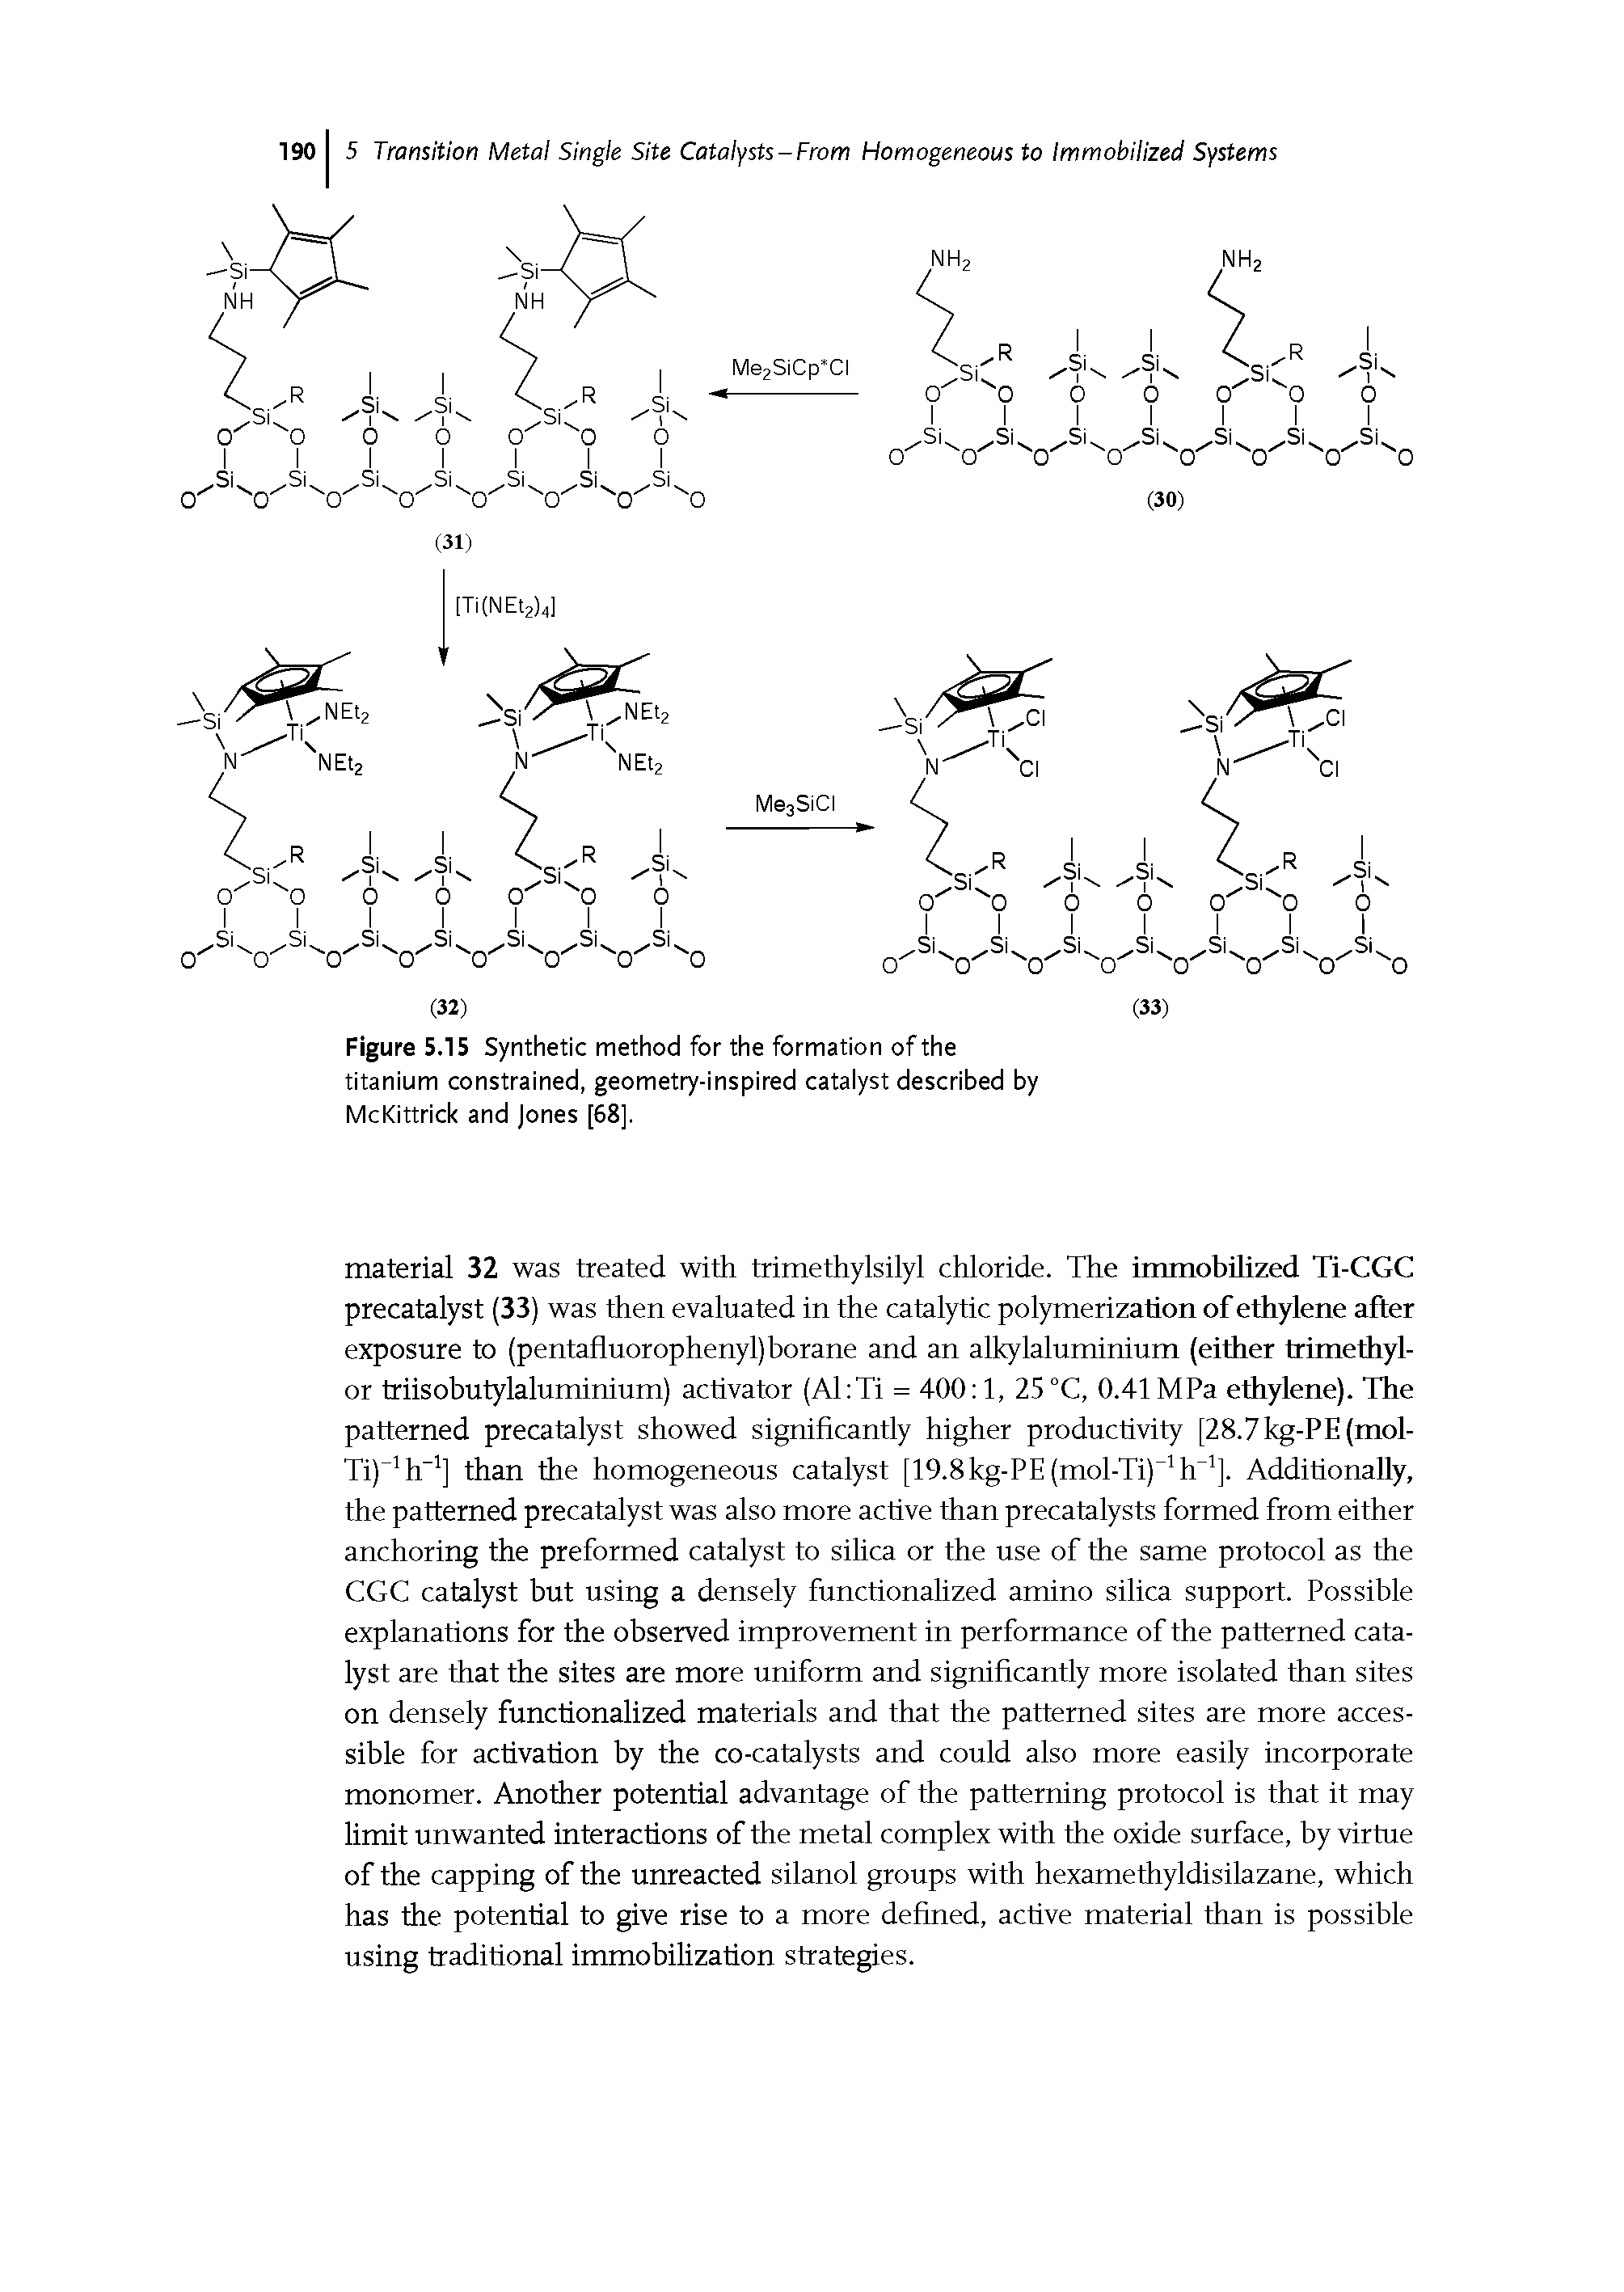 Figure 5.15 Synthetic method for the formation of the titanium constrained, geometry-inspired catalyst described by McKittrick and Jones [68].